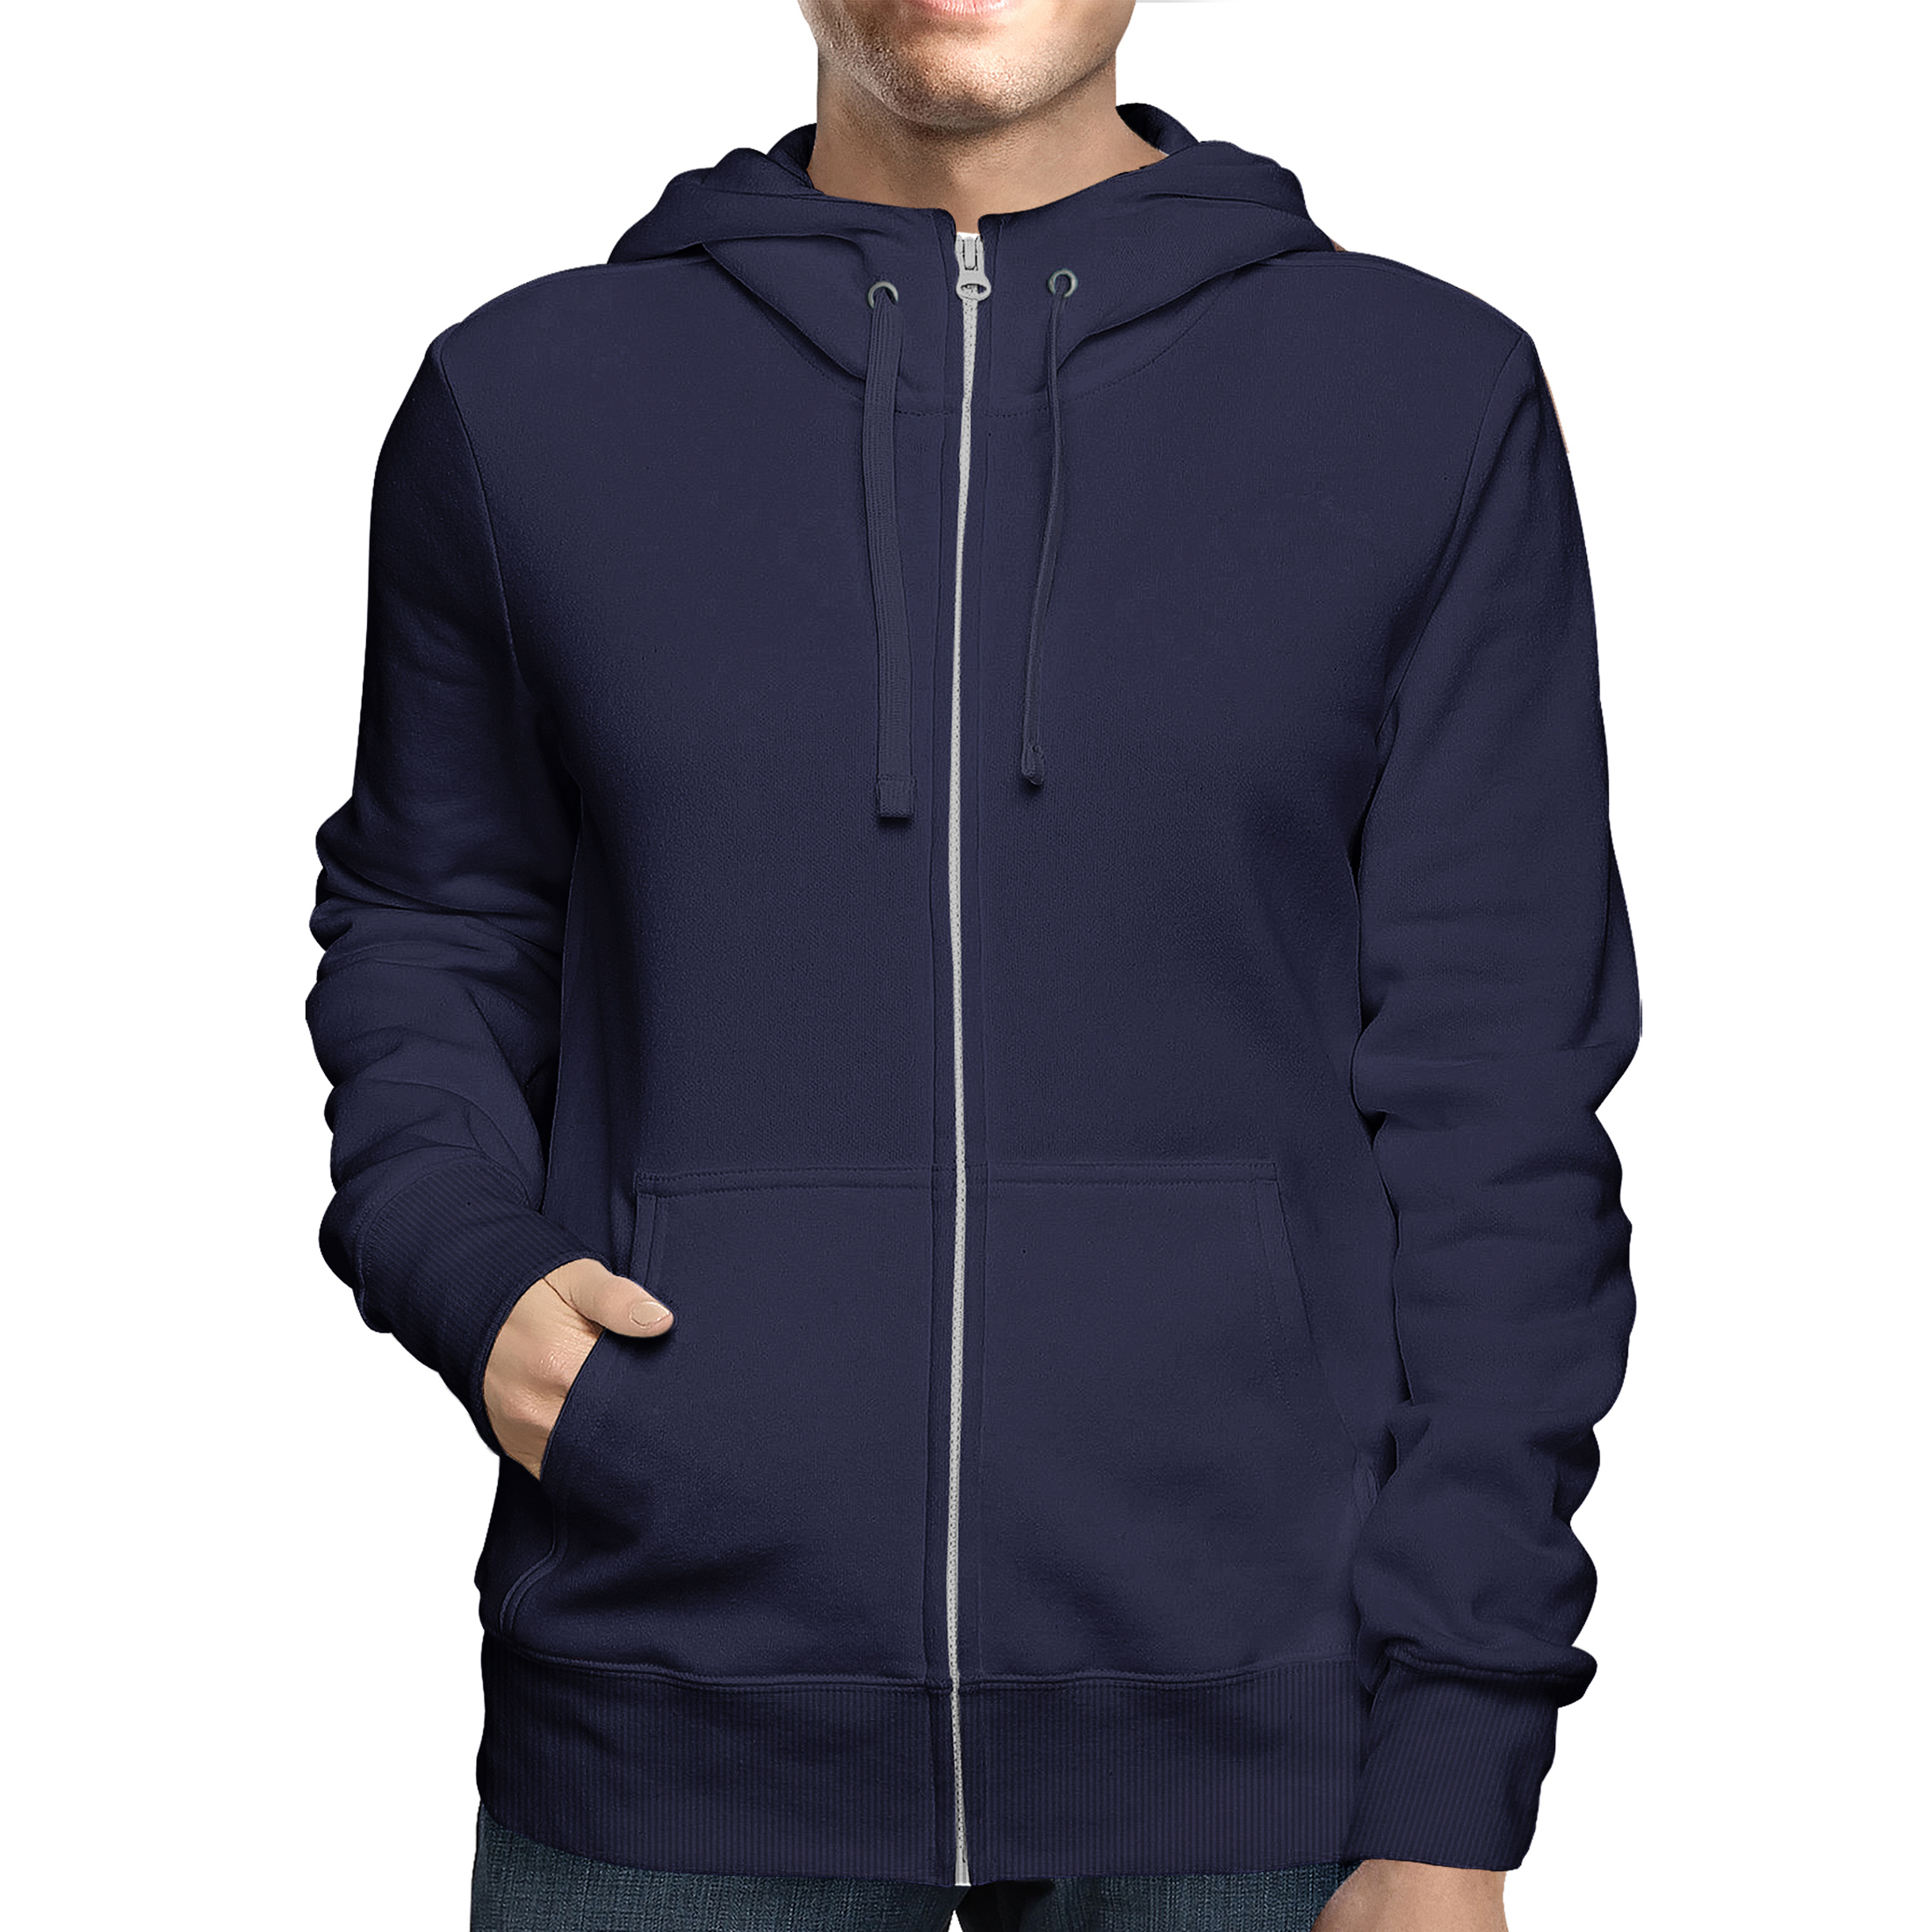 2-Pack: Men's Full Zip Up Fleece-Lined Hoodie Sweatshirt (Big & Tall Size Available) - Navy, Large